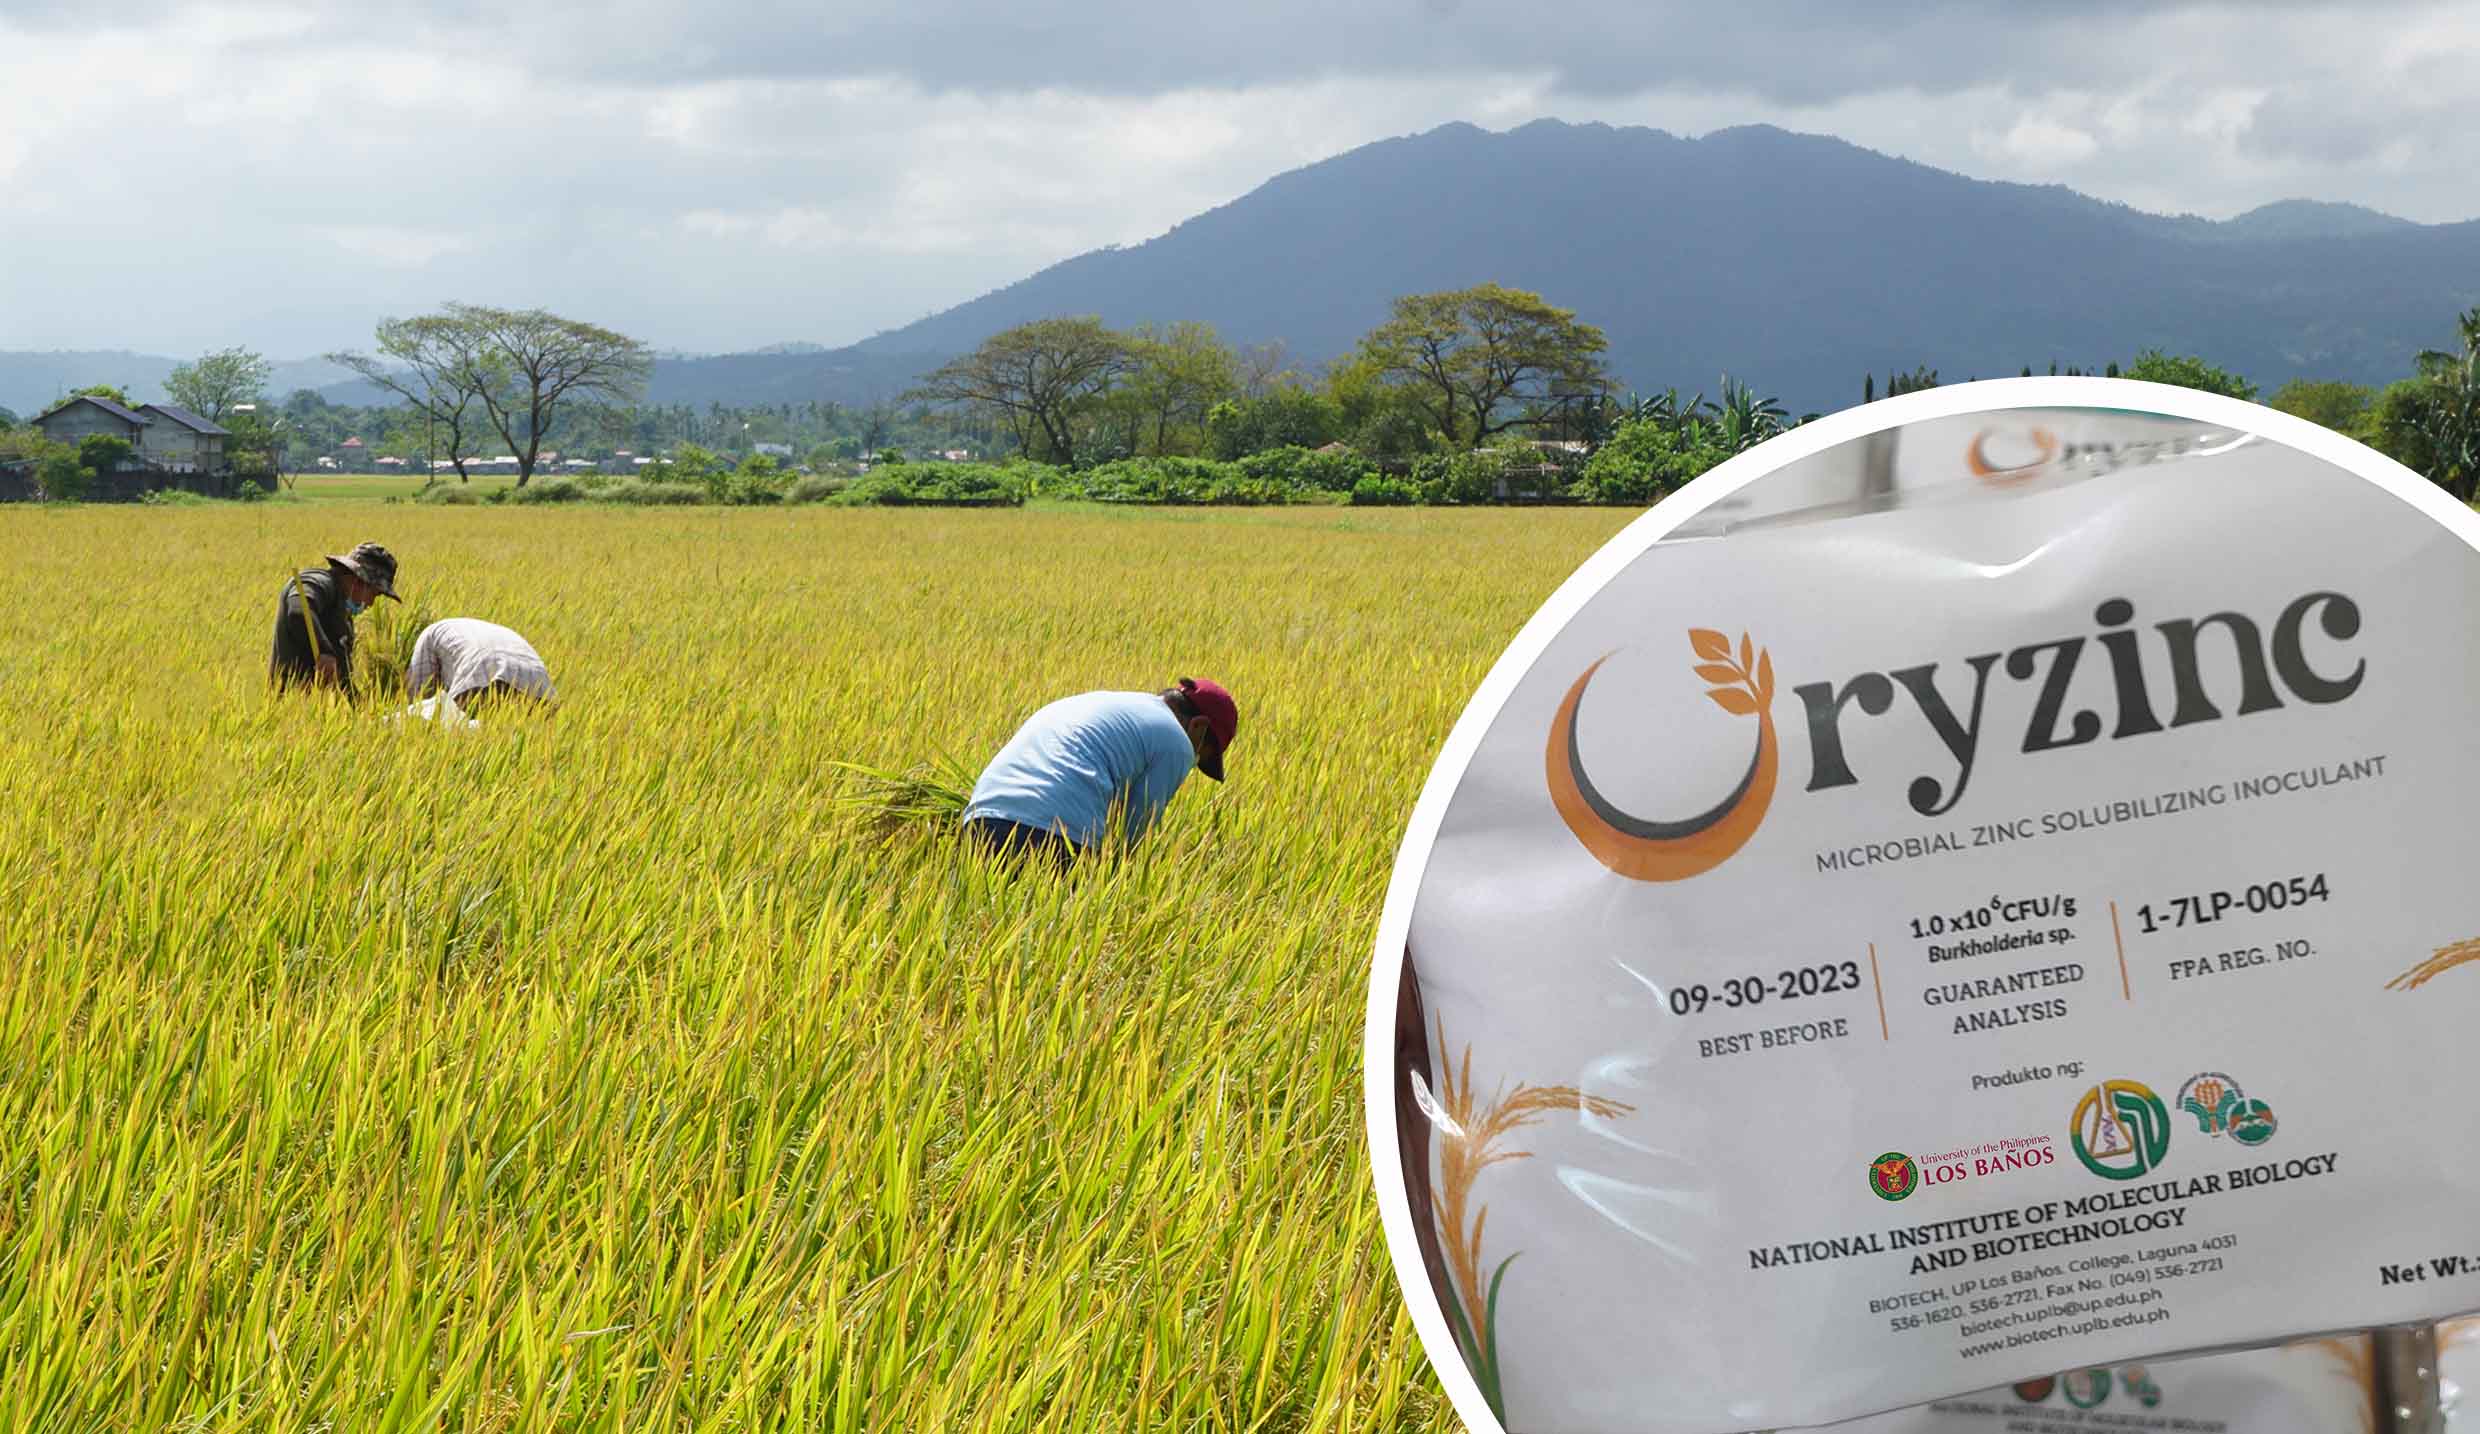 Oryzinc™ – A Sustainable Solution for Rice Biofortification and Soil Zinc-Solubilization